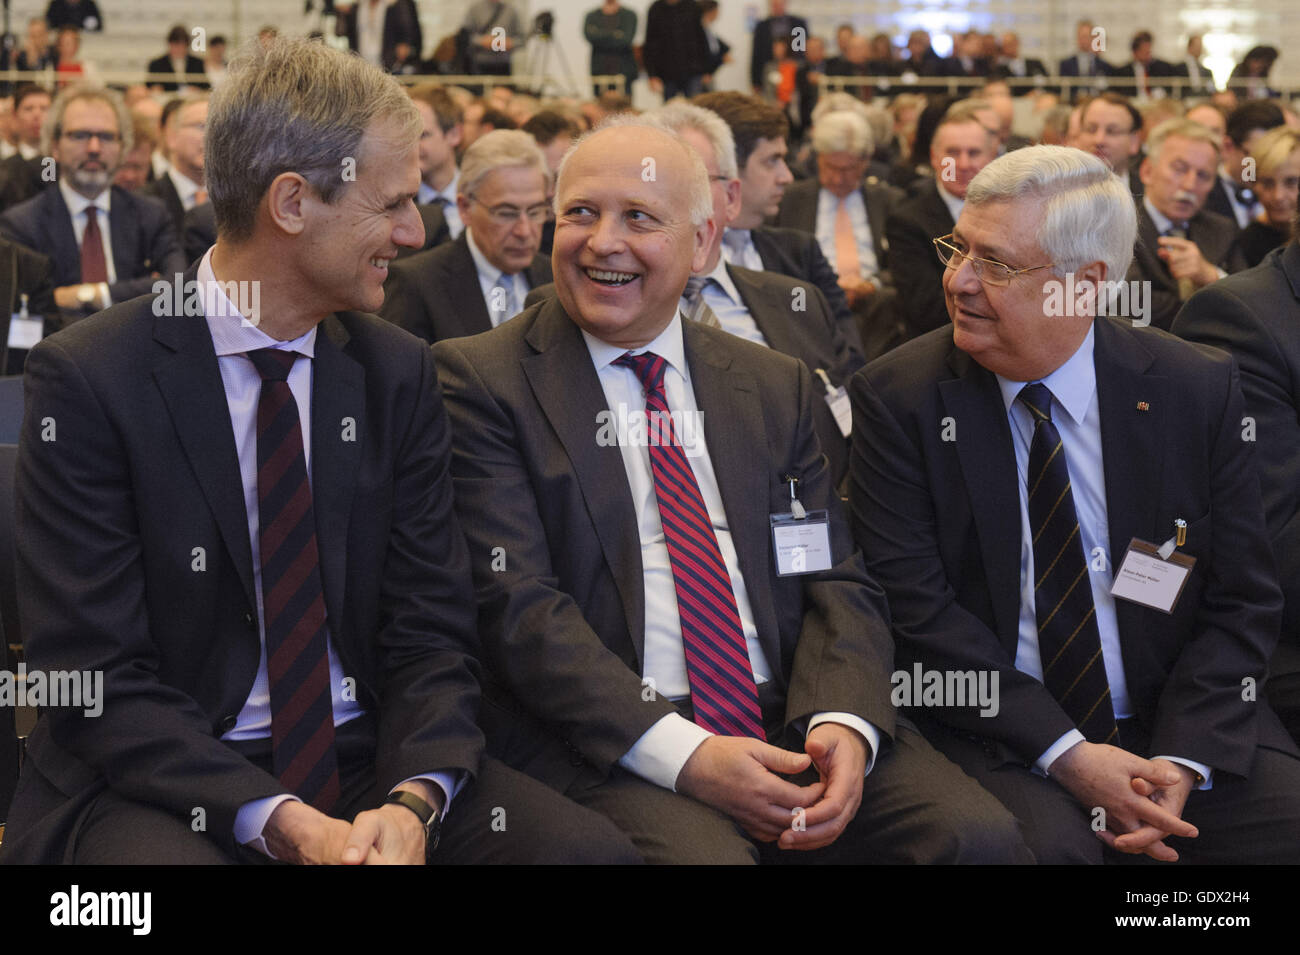 Michael Kemmer, Emmerich Müller and Klaus-Peter Müller in Berlin, Germany, 2014 Stock Photo